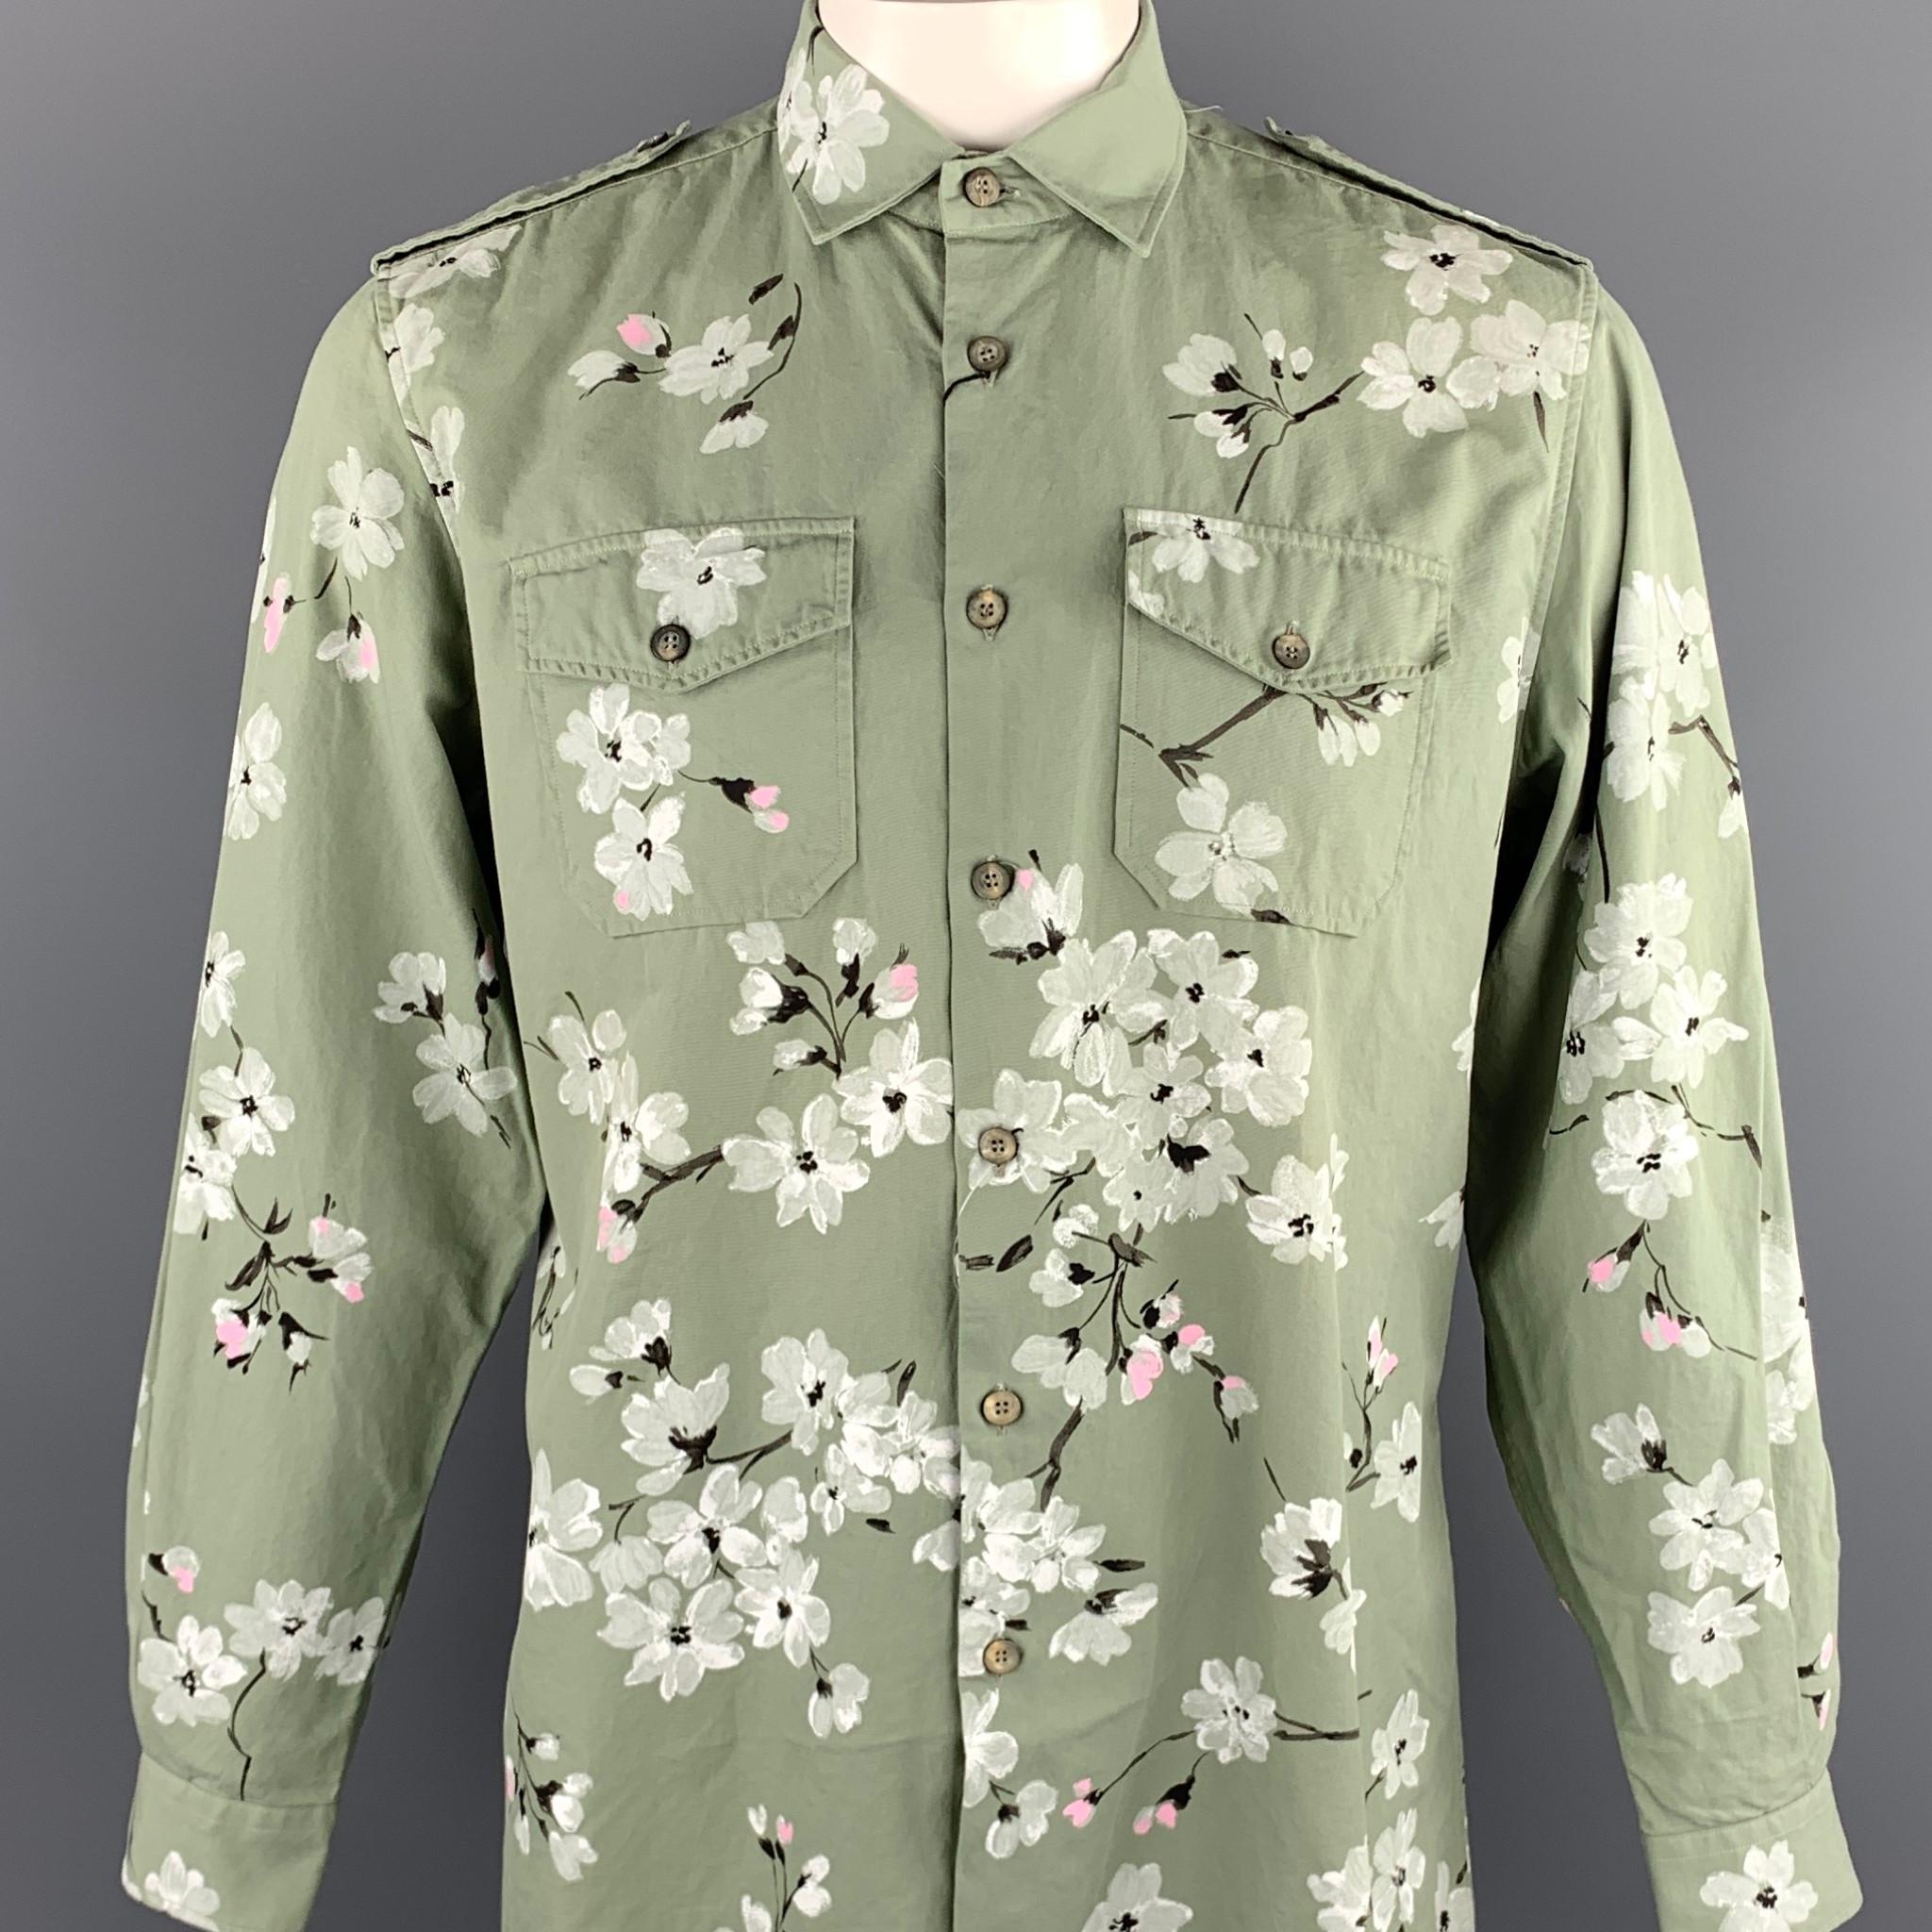 GUCCI by TOM FORD Spring 2003 long sleeve shirt comes in a olive cotton with a hand painted floral print featuring a button up style, epaulettes, patch pockets, and a spread collar. Made in Italy. 

New With Tags. 
Marked: